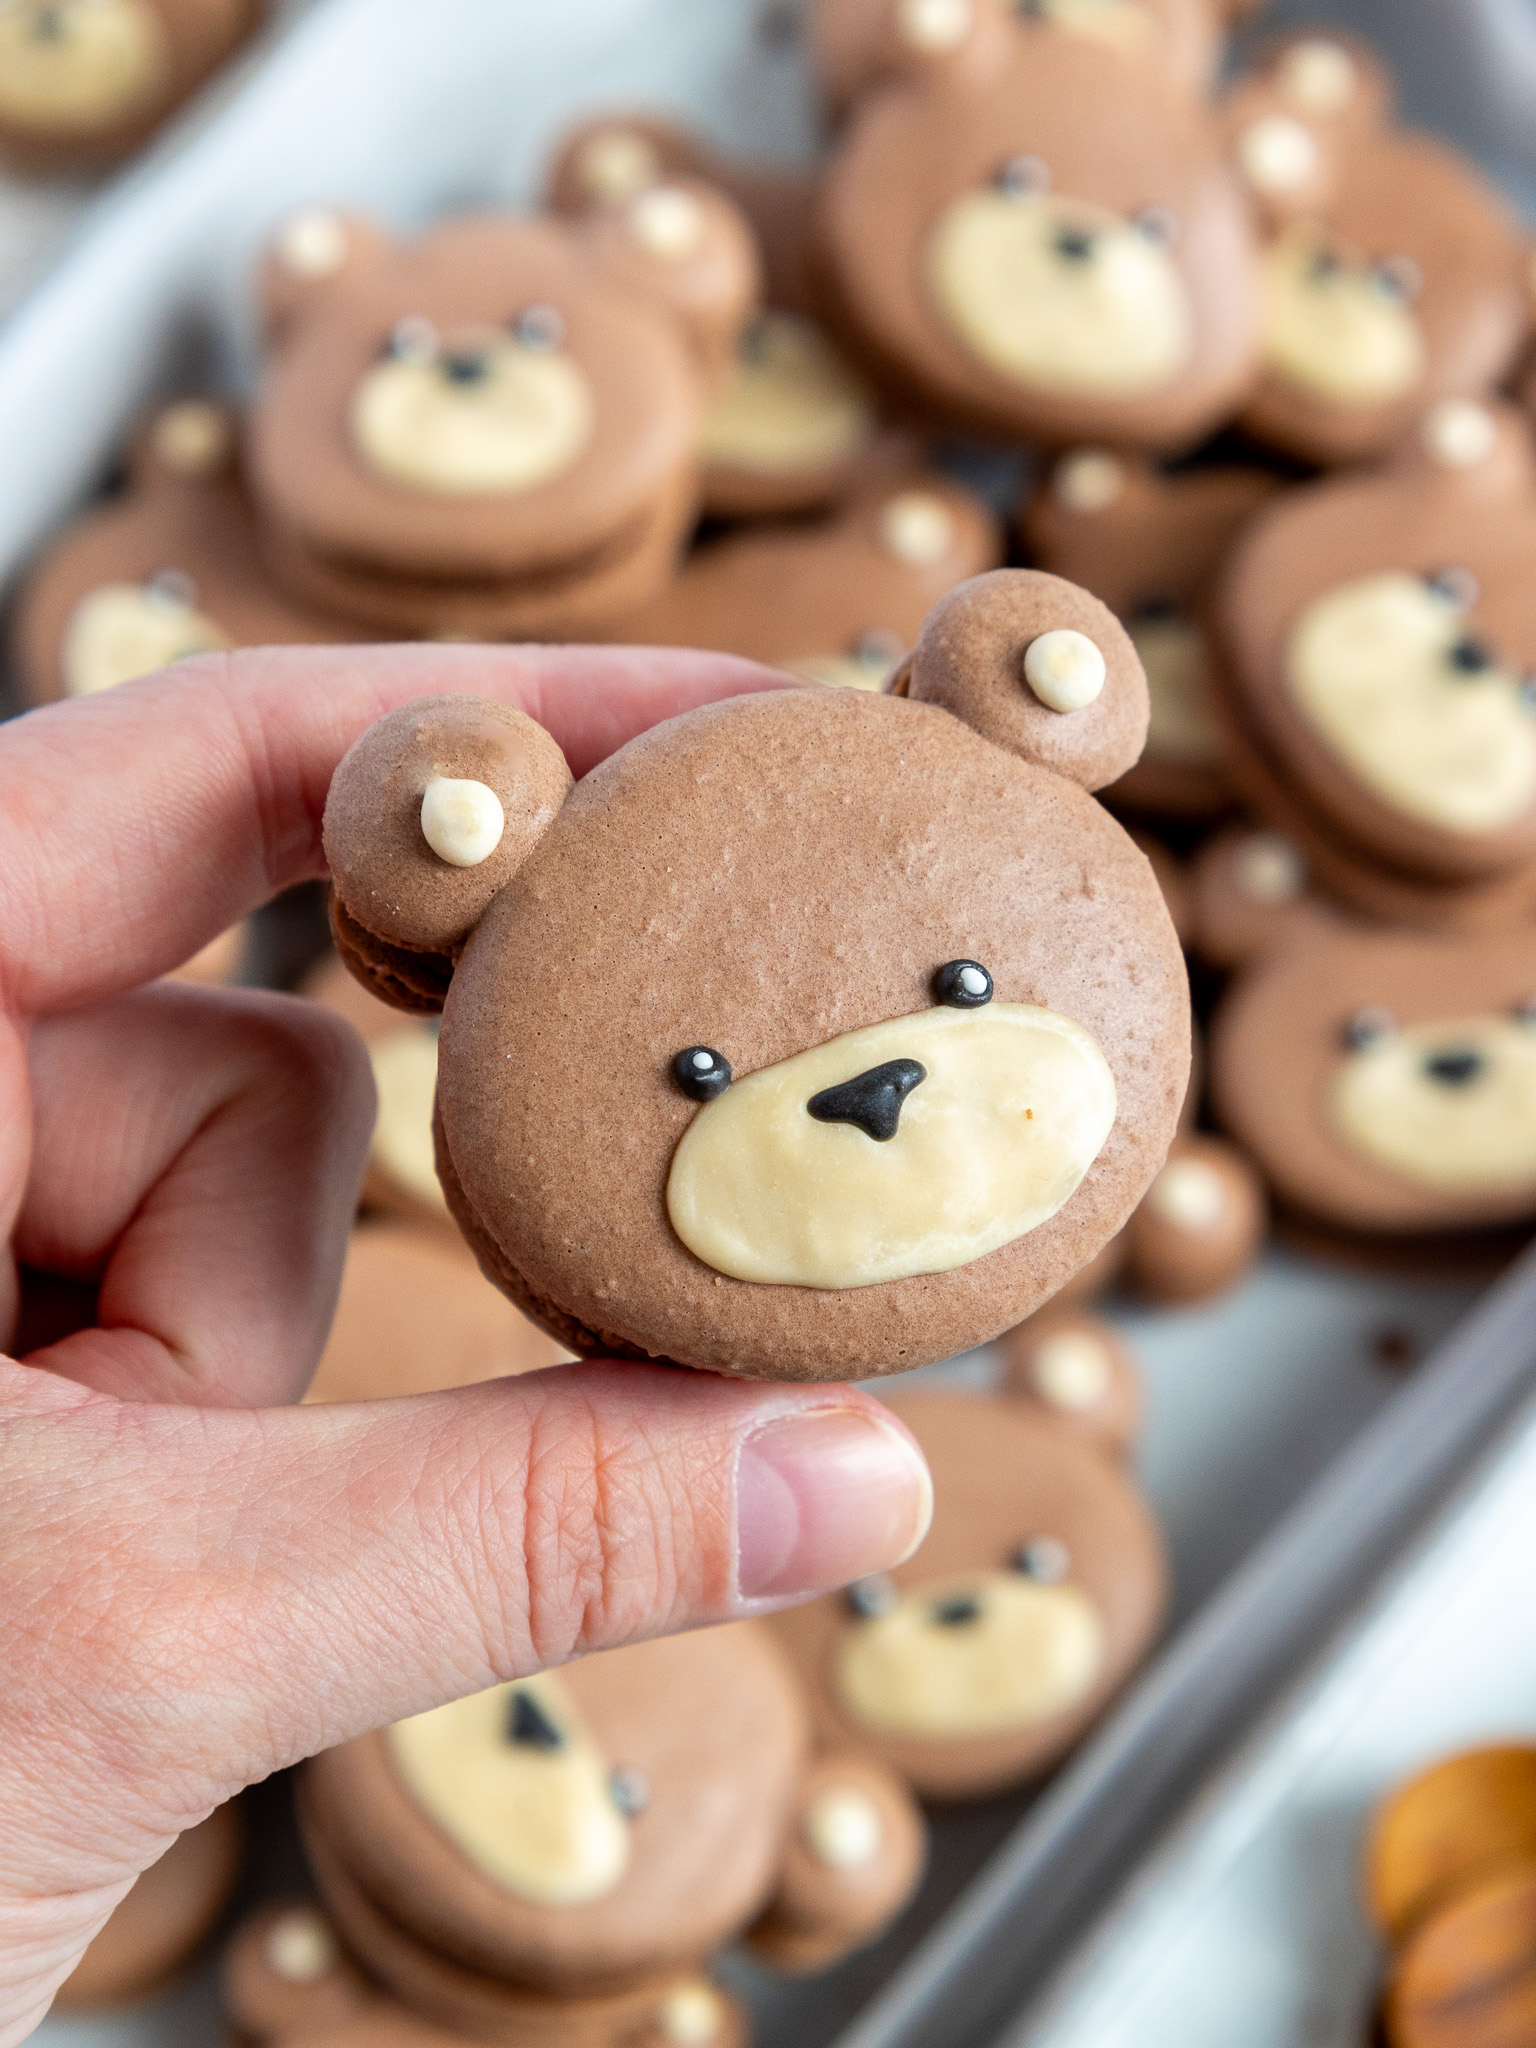 image of a cute teddy bear macaron being held up to show it's details